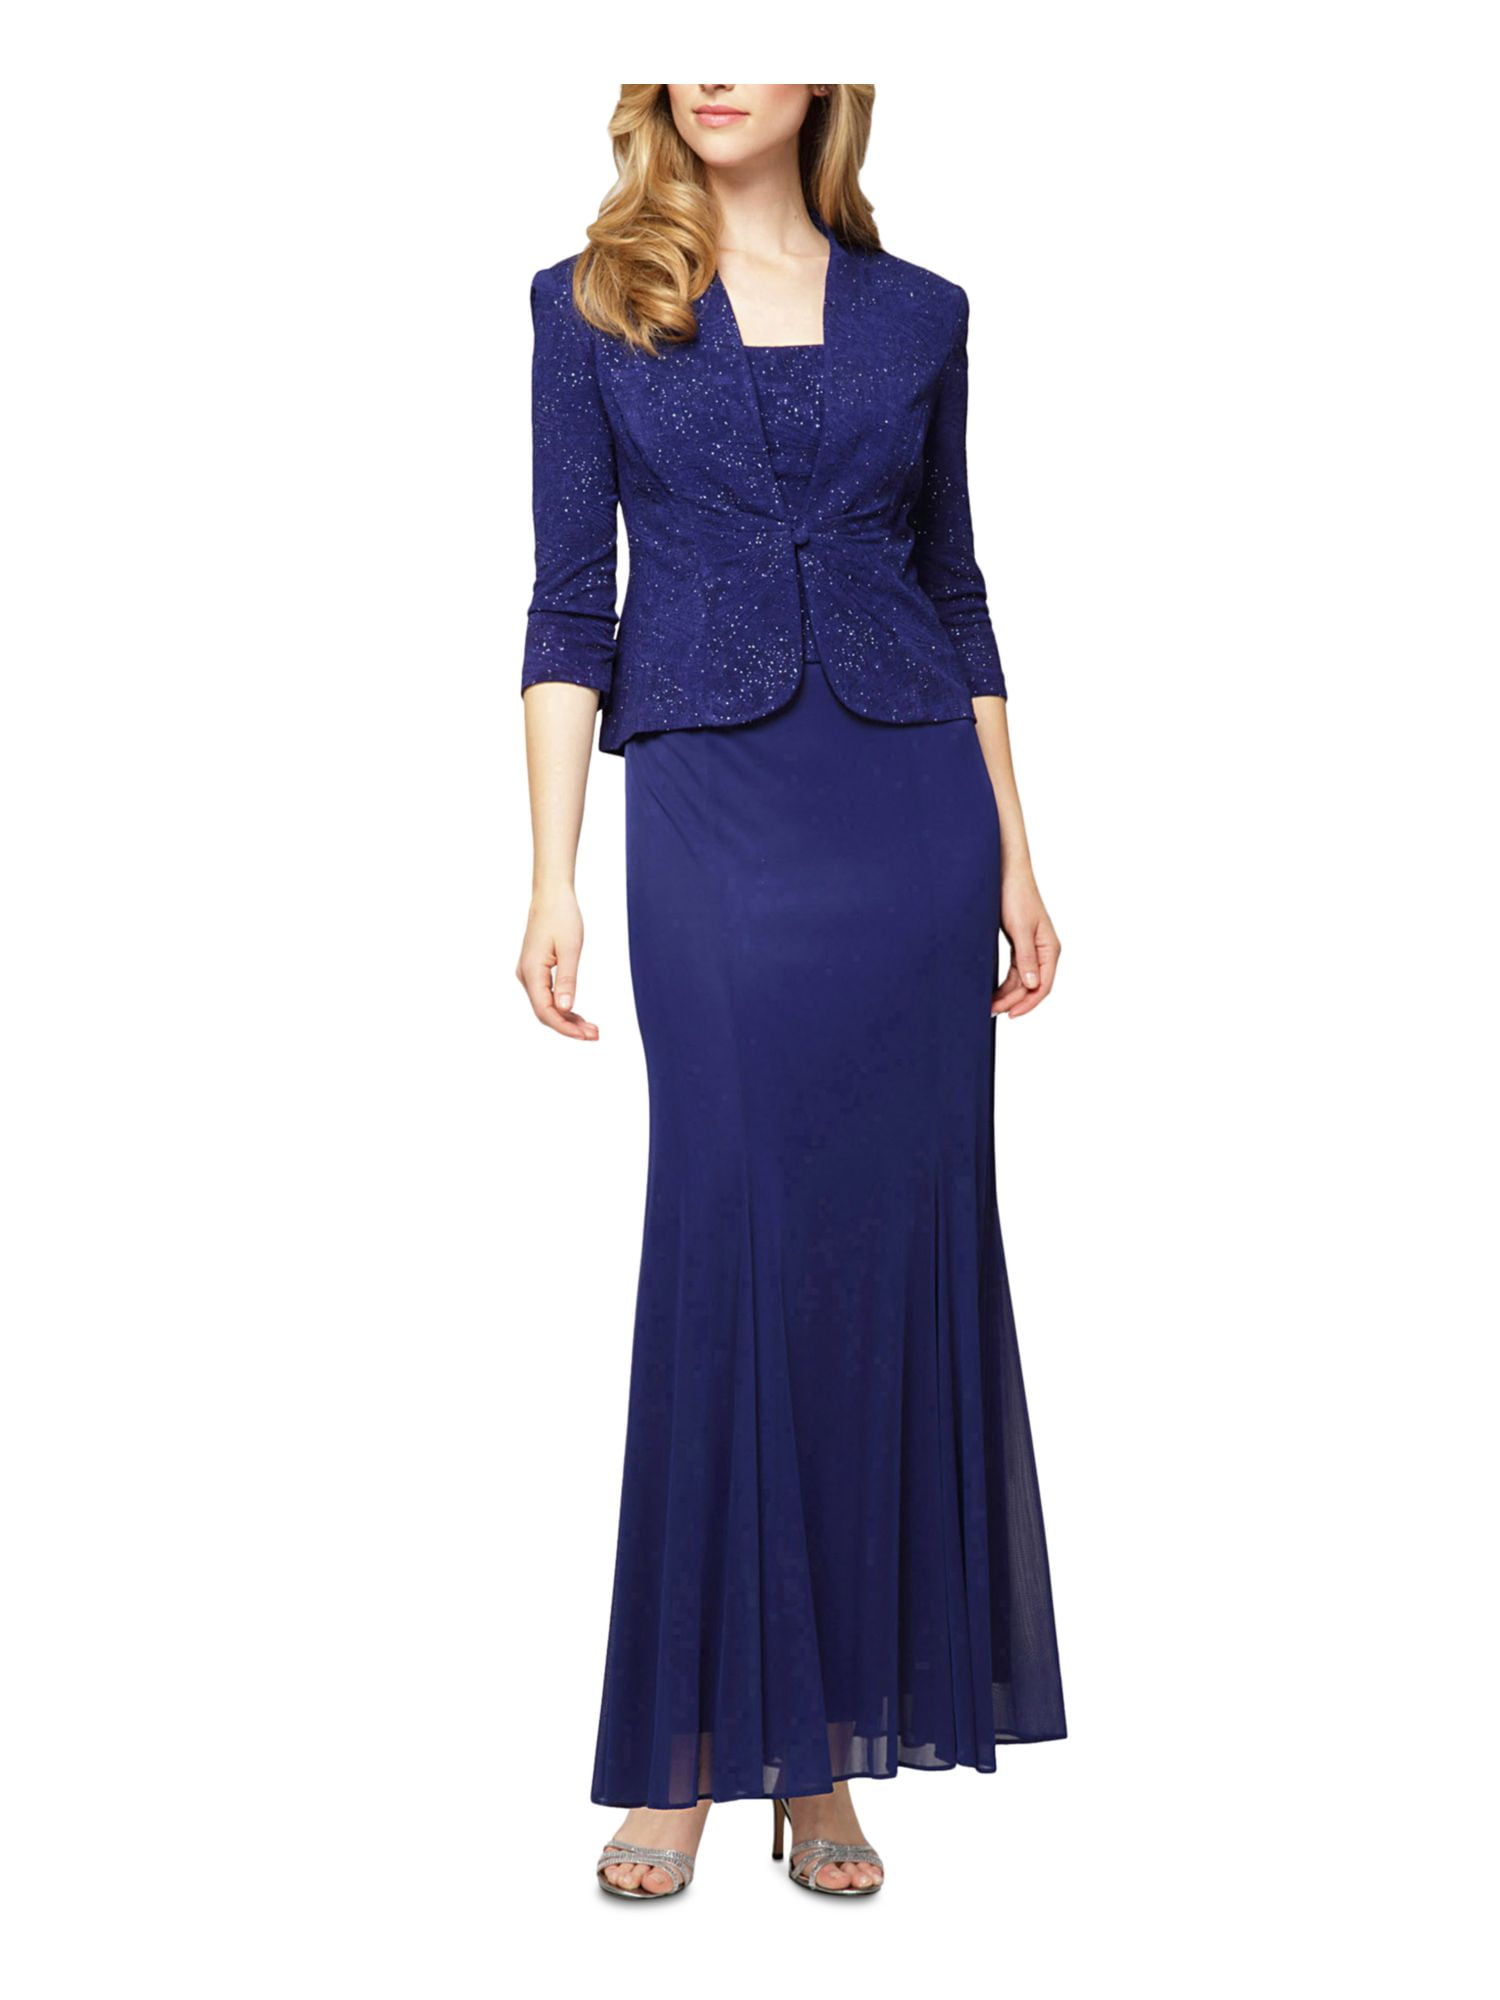 Gown : navy Blue art silk long gown with jacquard jacket